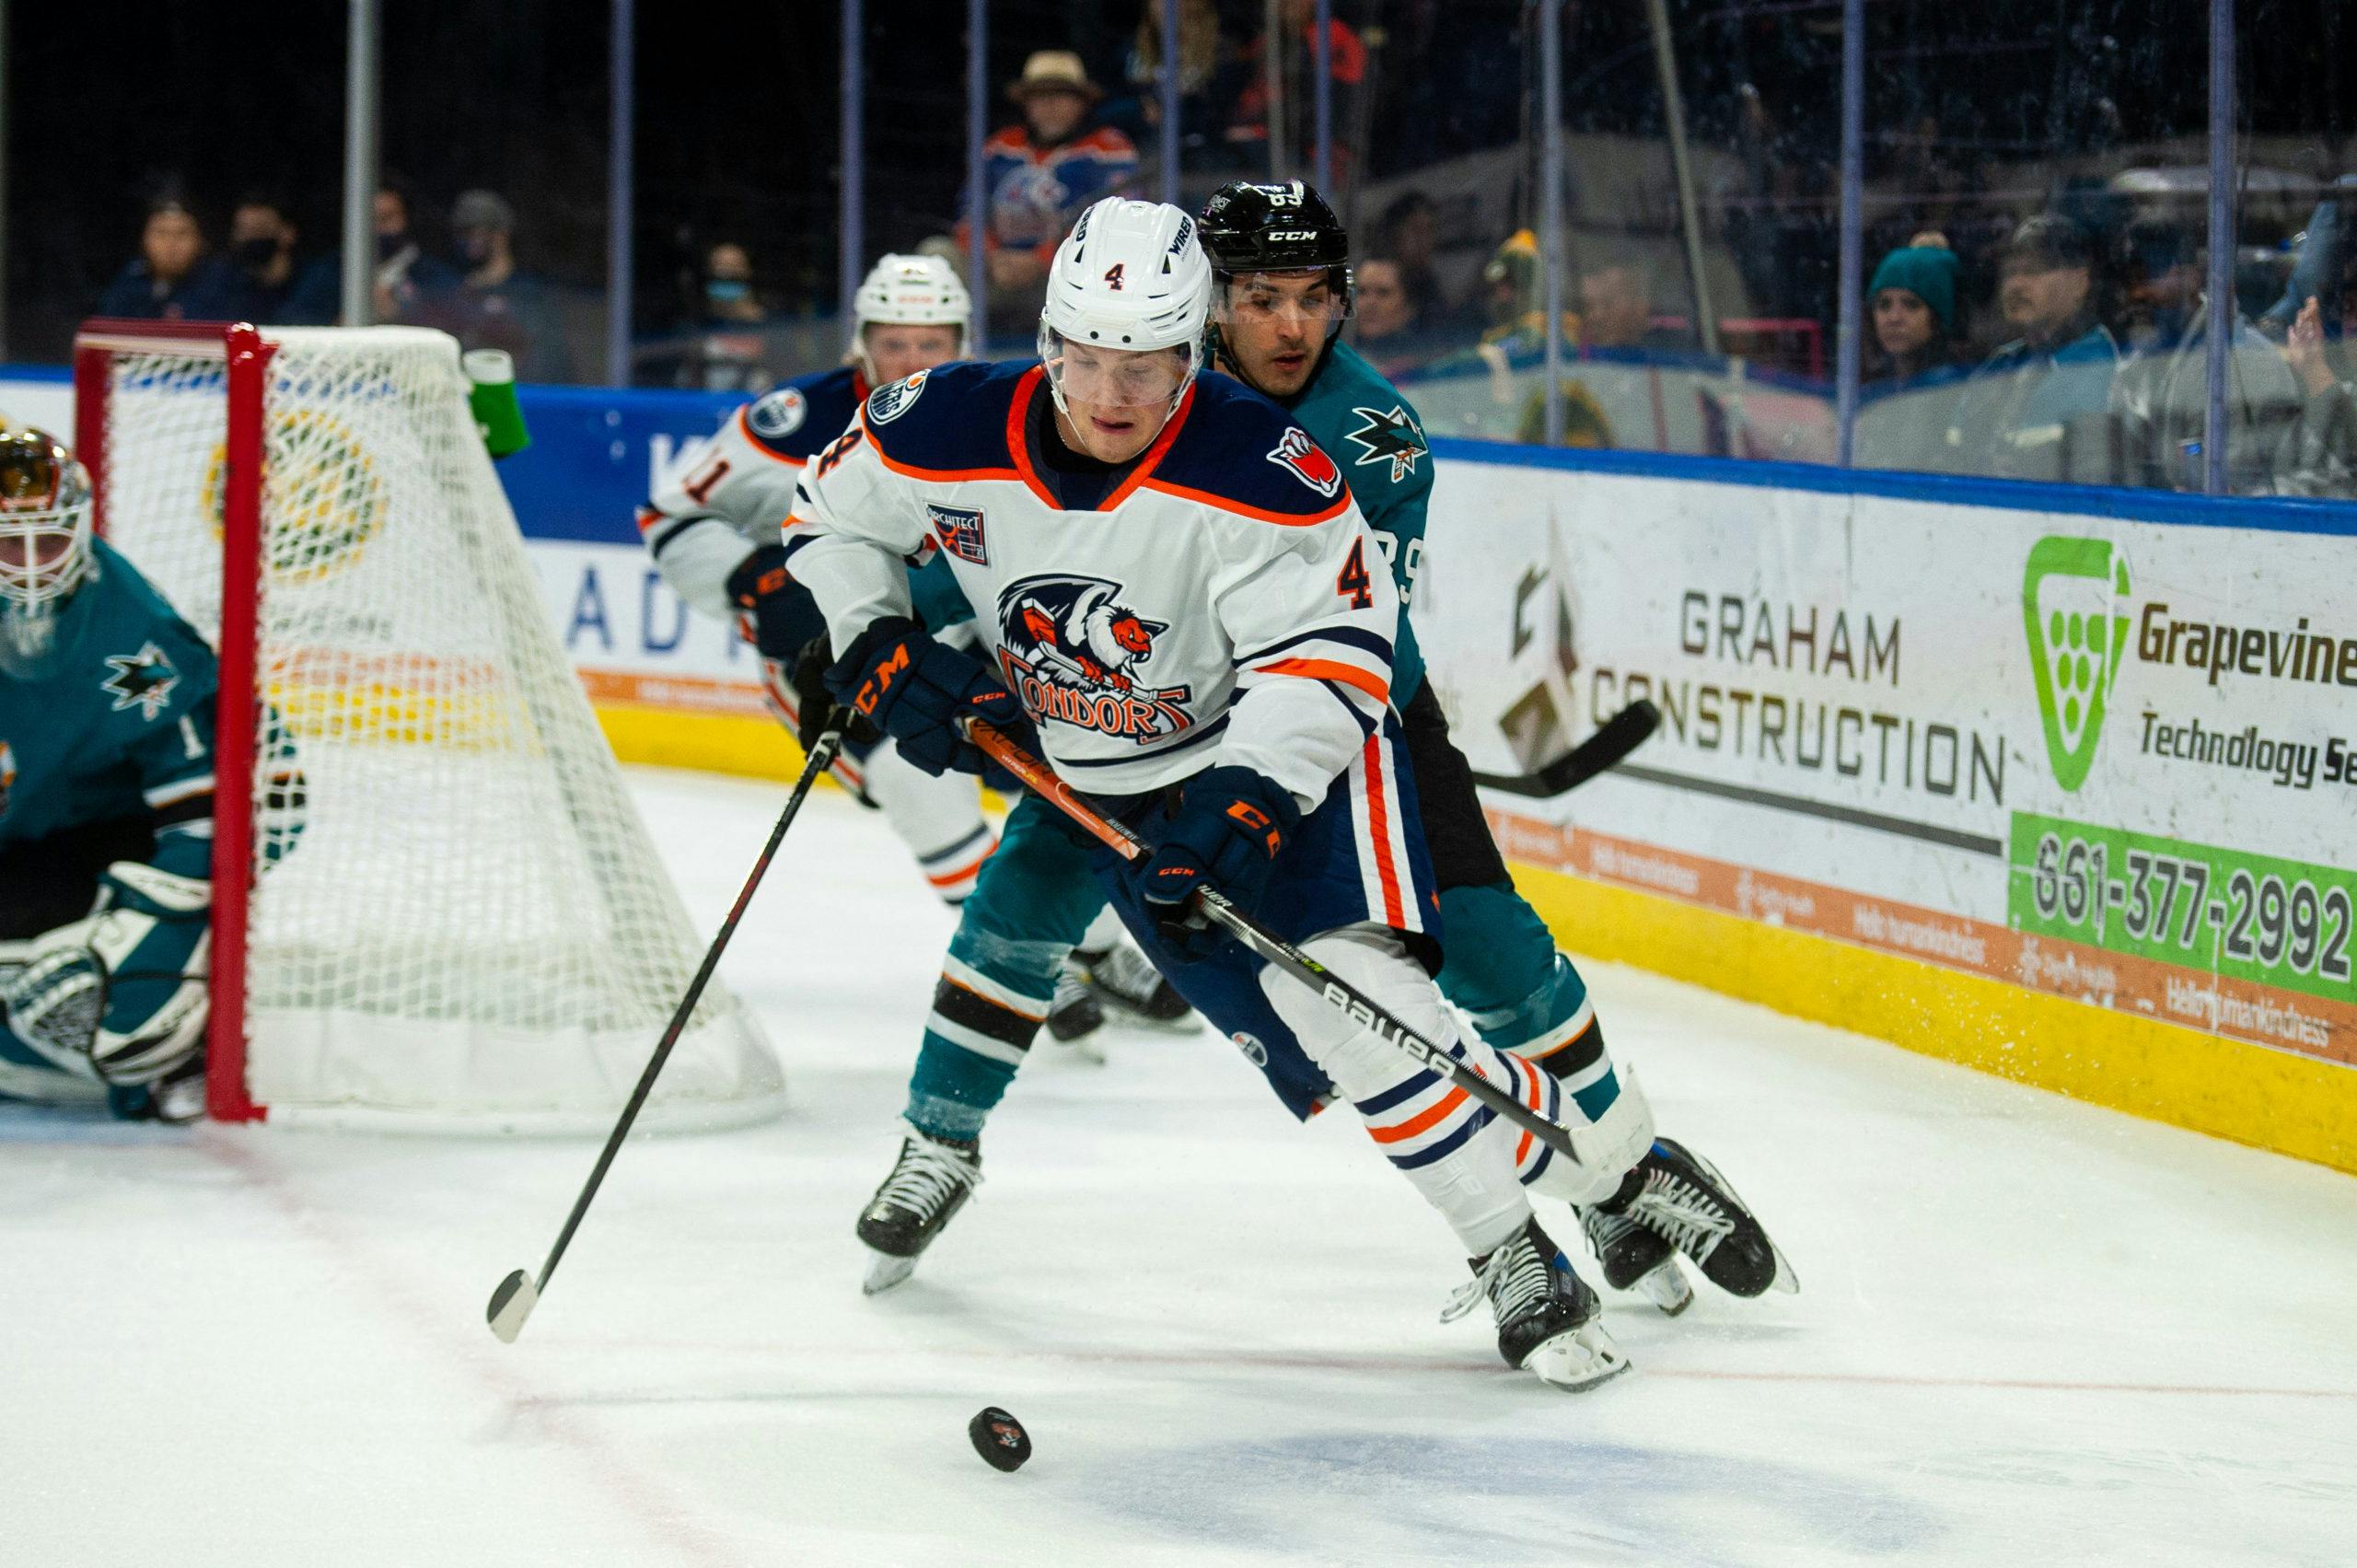 Edmonton Oilers' Dylan Holloway (55) gets up after a hit as Oilers